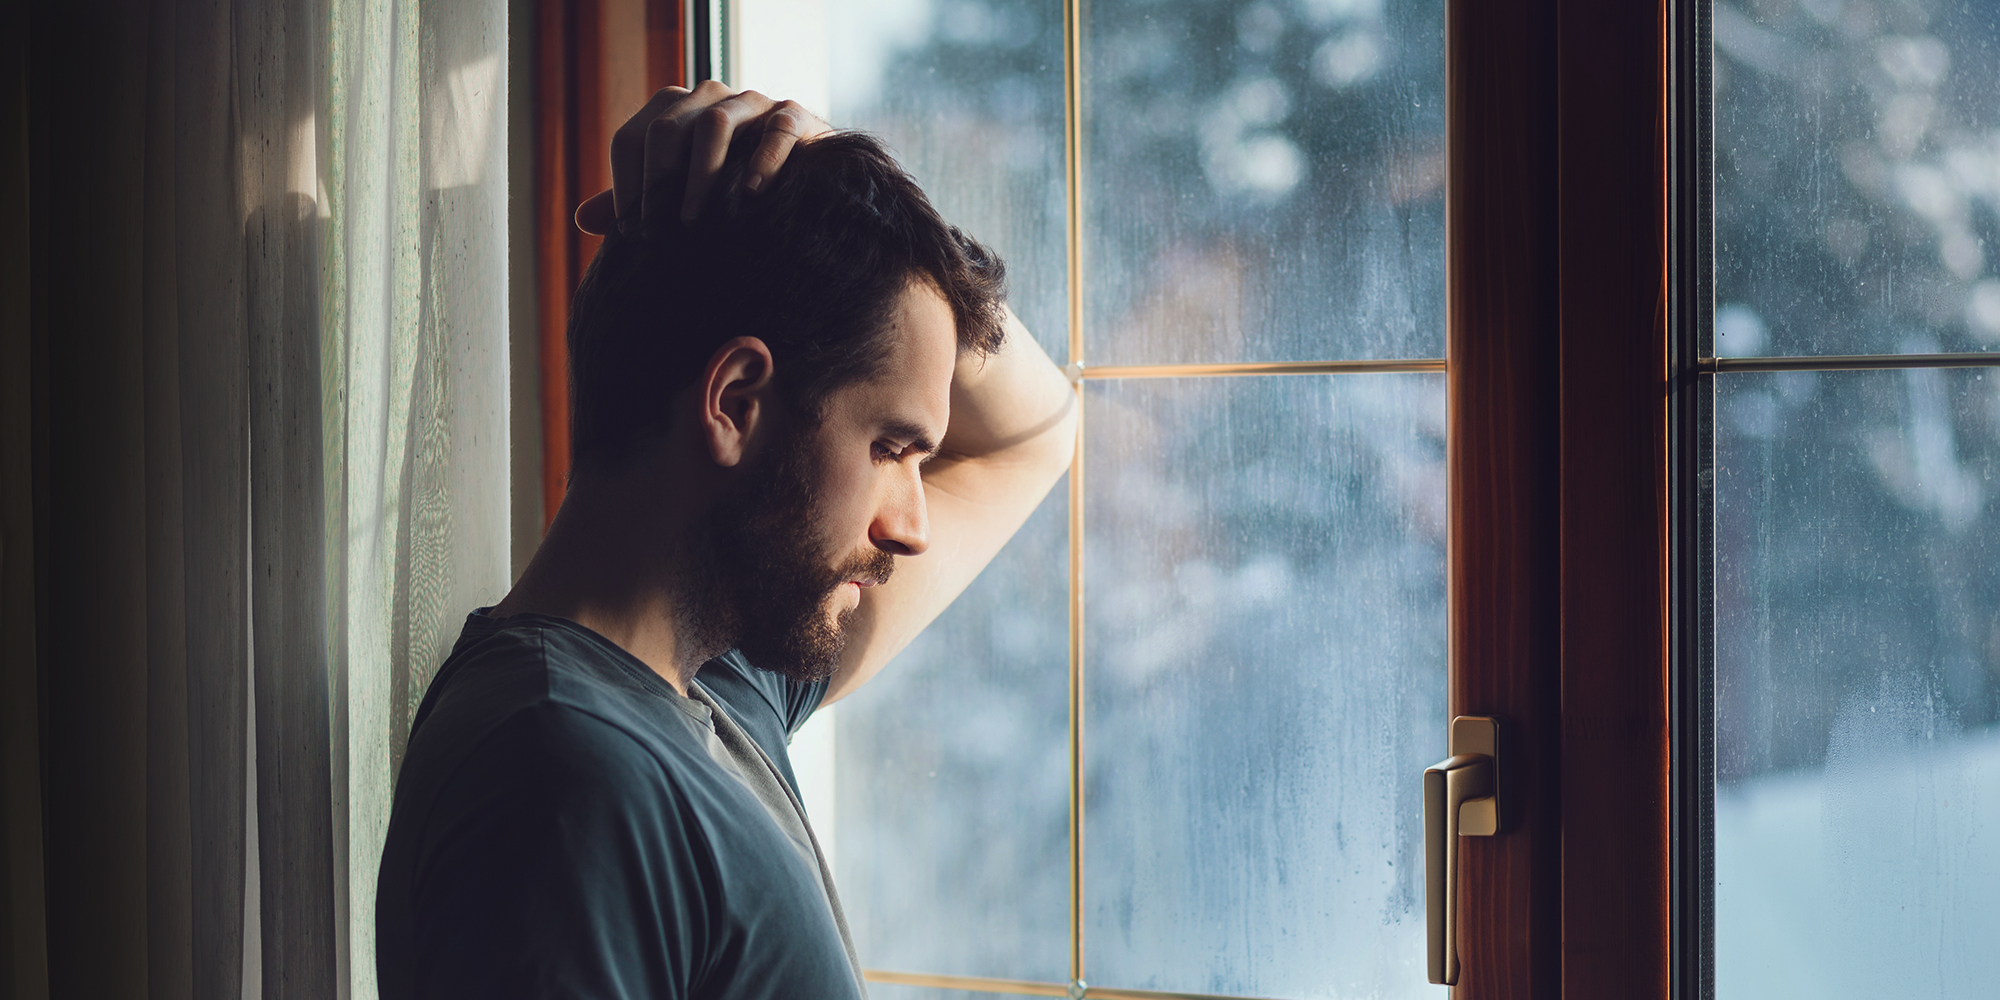 Does Depression Go Away on Its Own With Time?